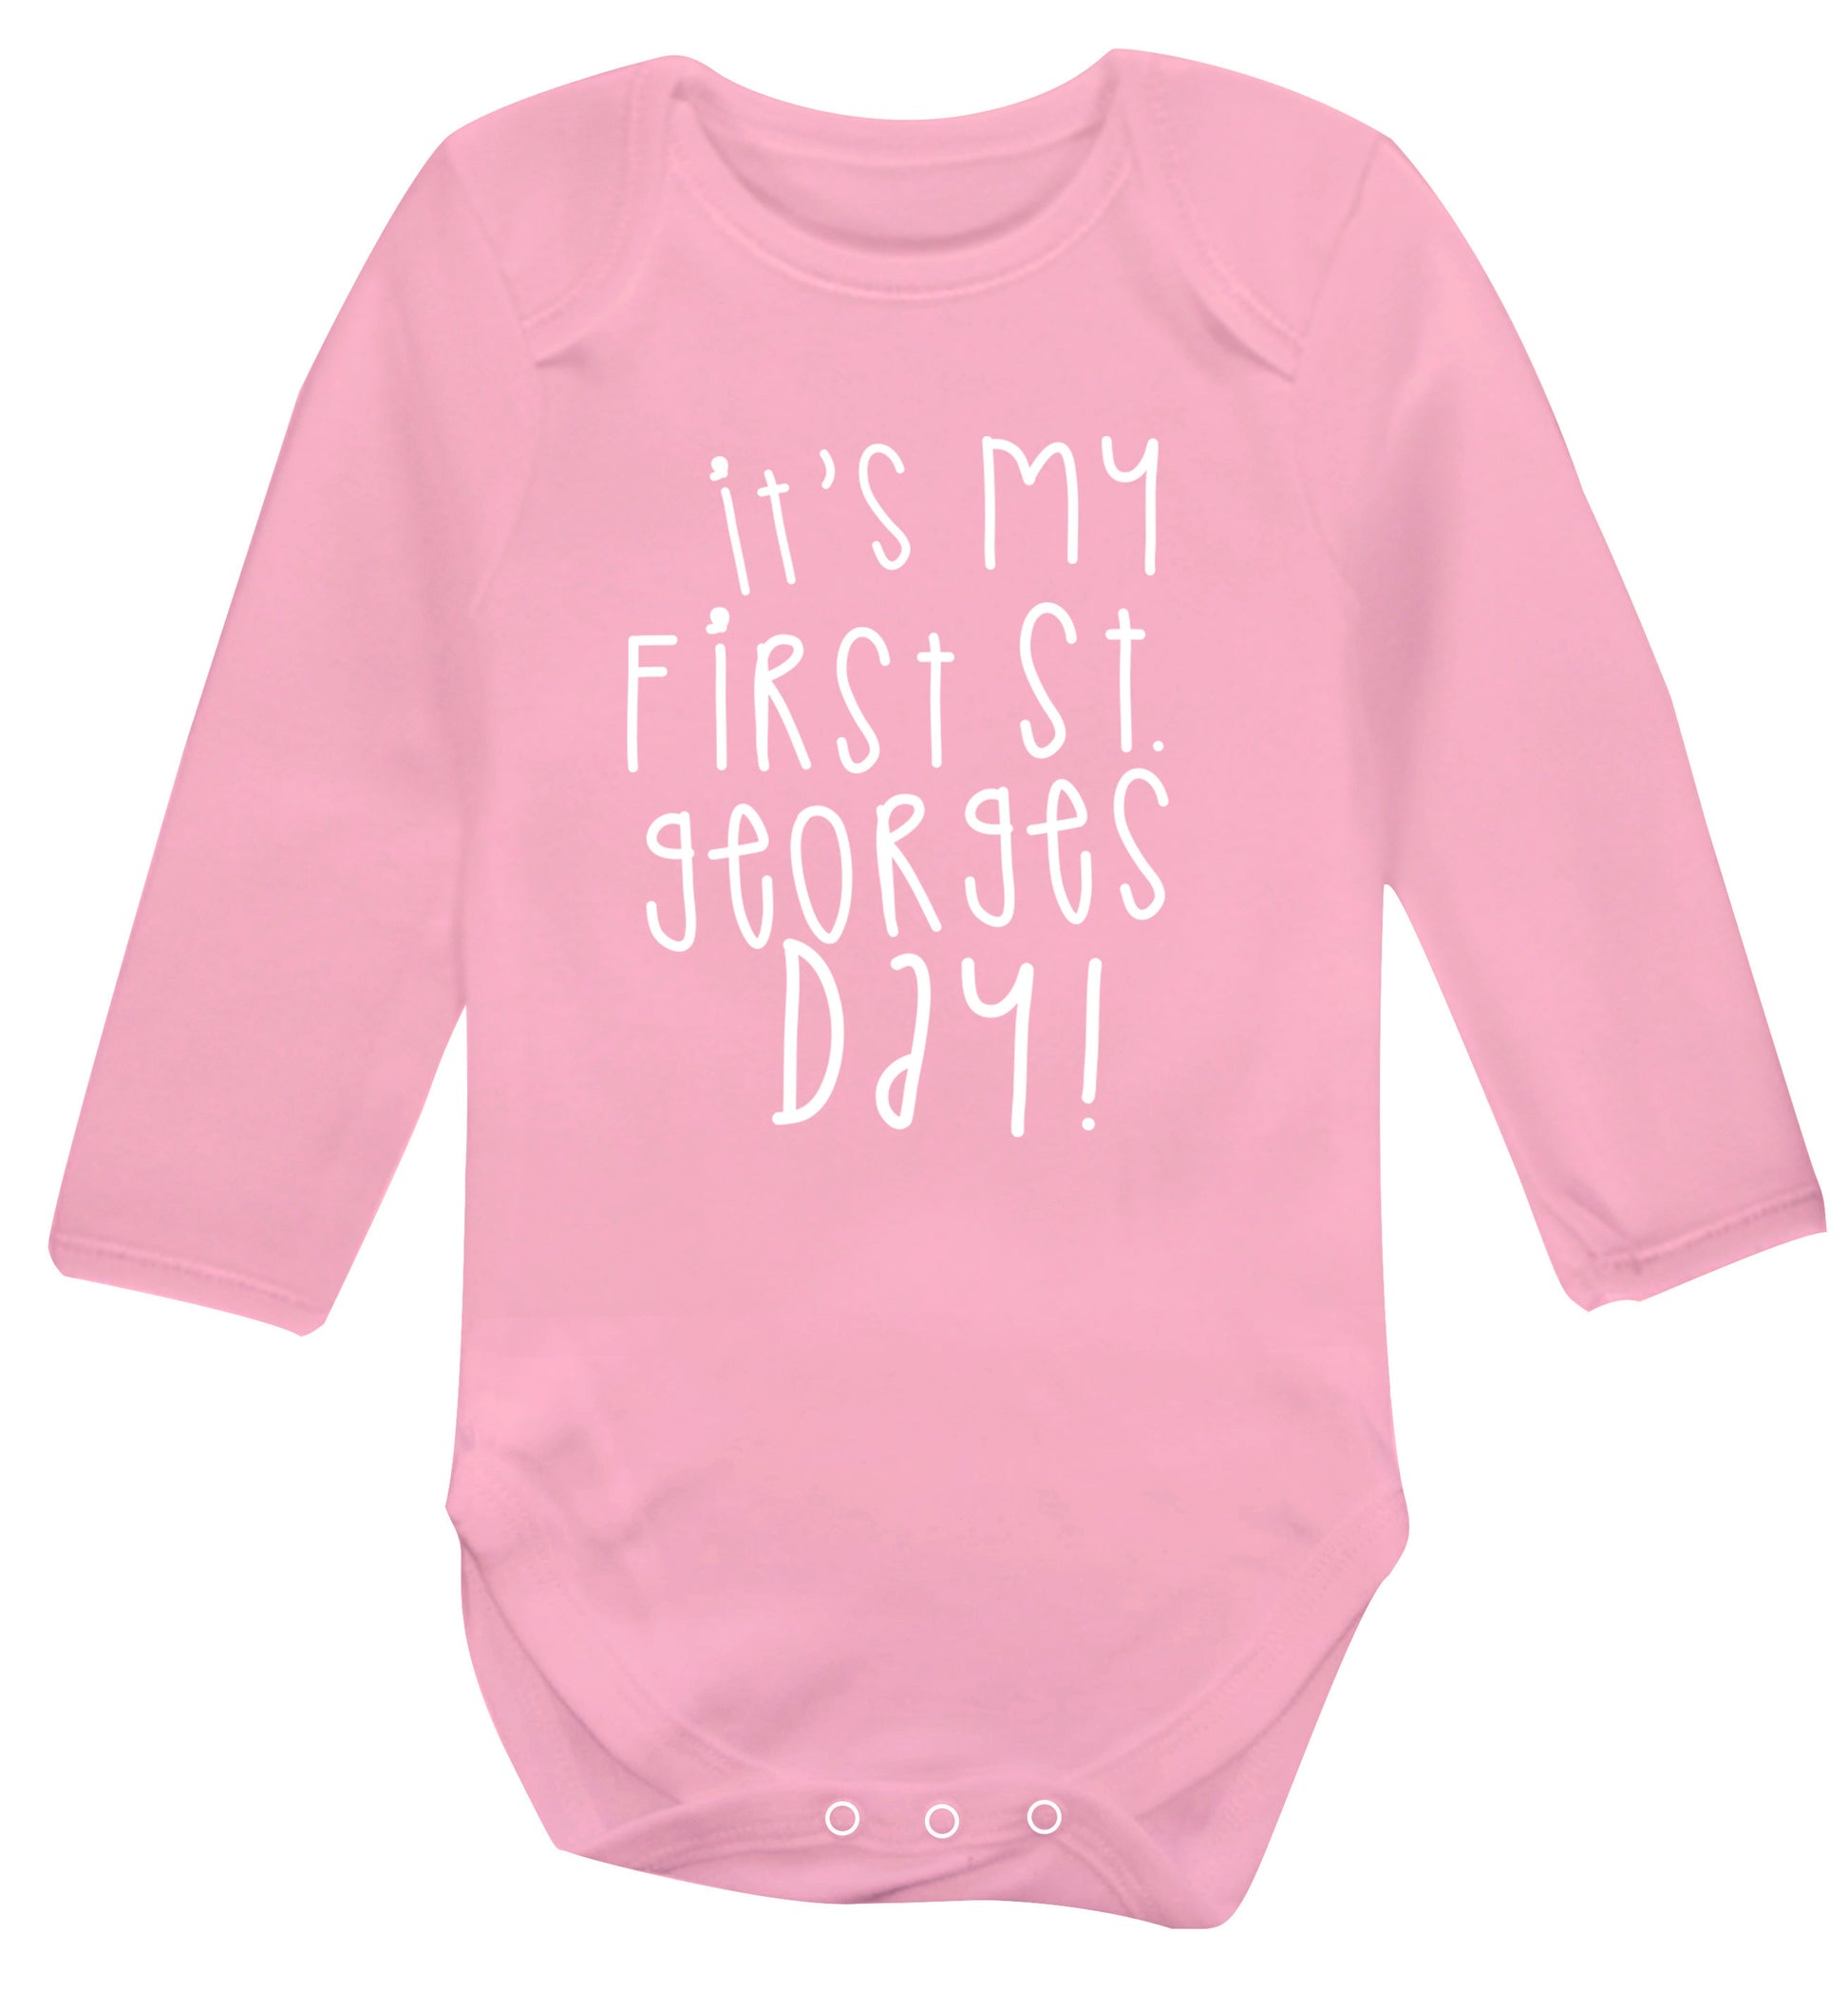 It's my first St Georges day Baby Vest long sleeved pale pink 6-12 months